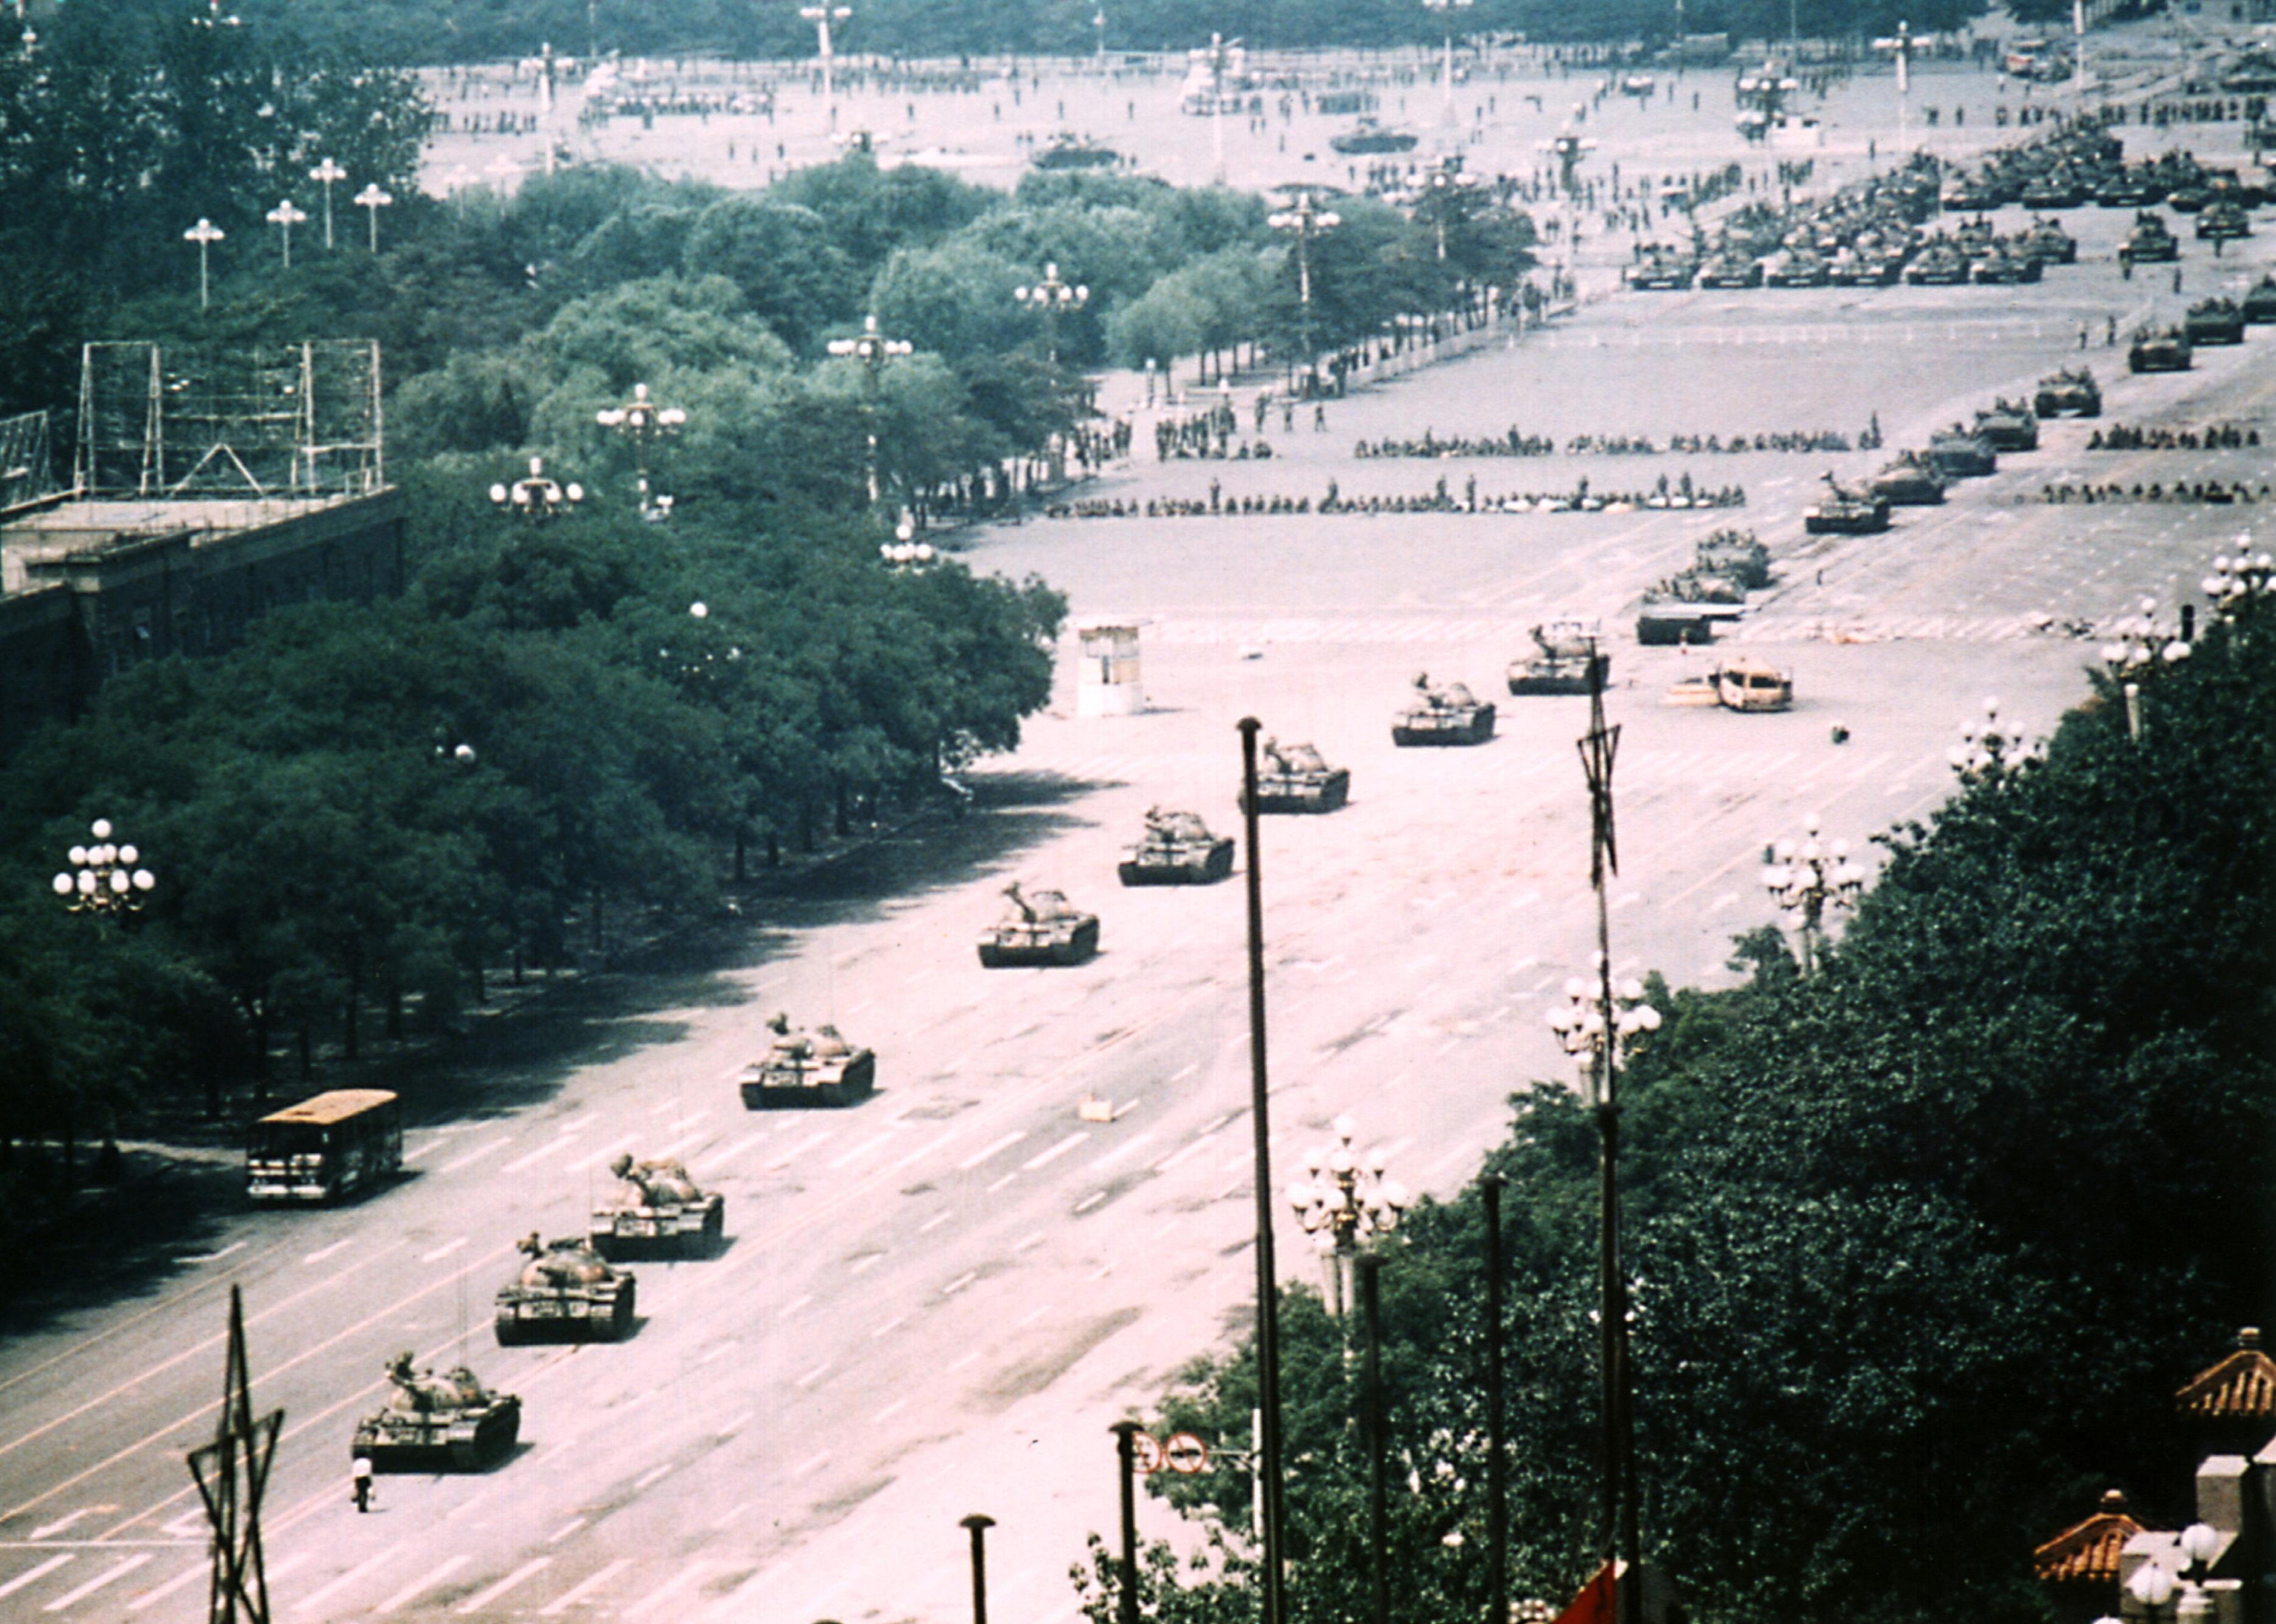 “Tank Man” became an iconic image of the Tiananmen incident, but it does not reflect the regime's obsession with mass surveillance.